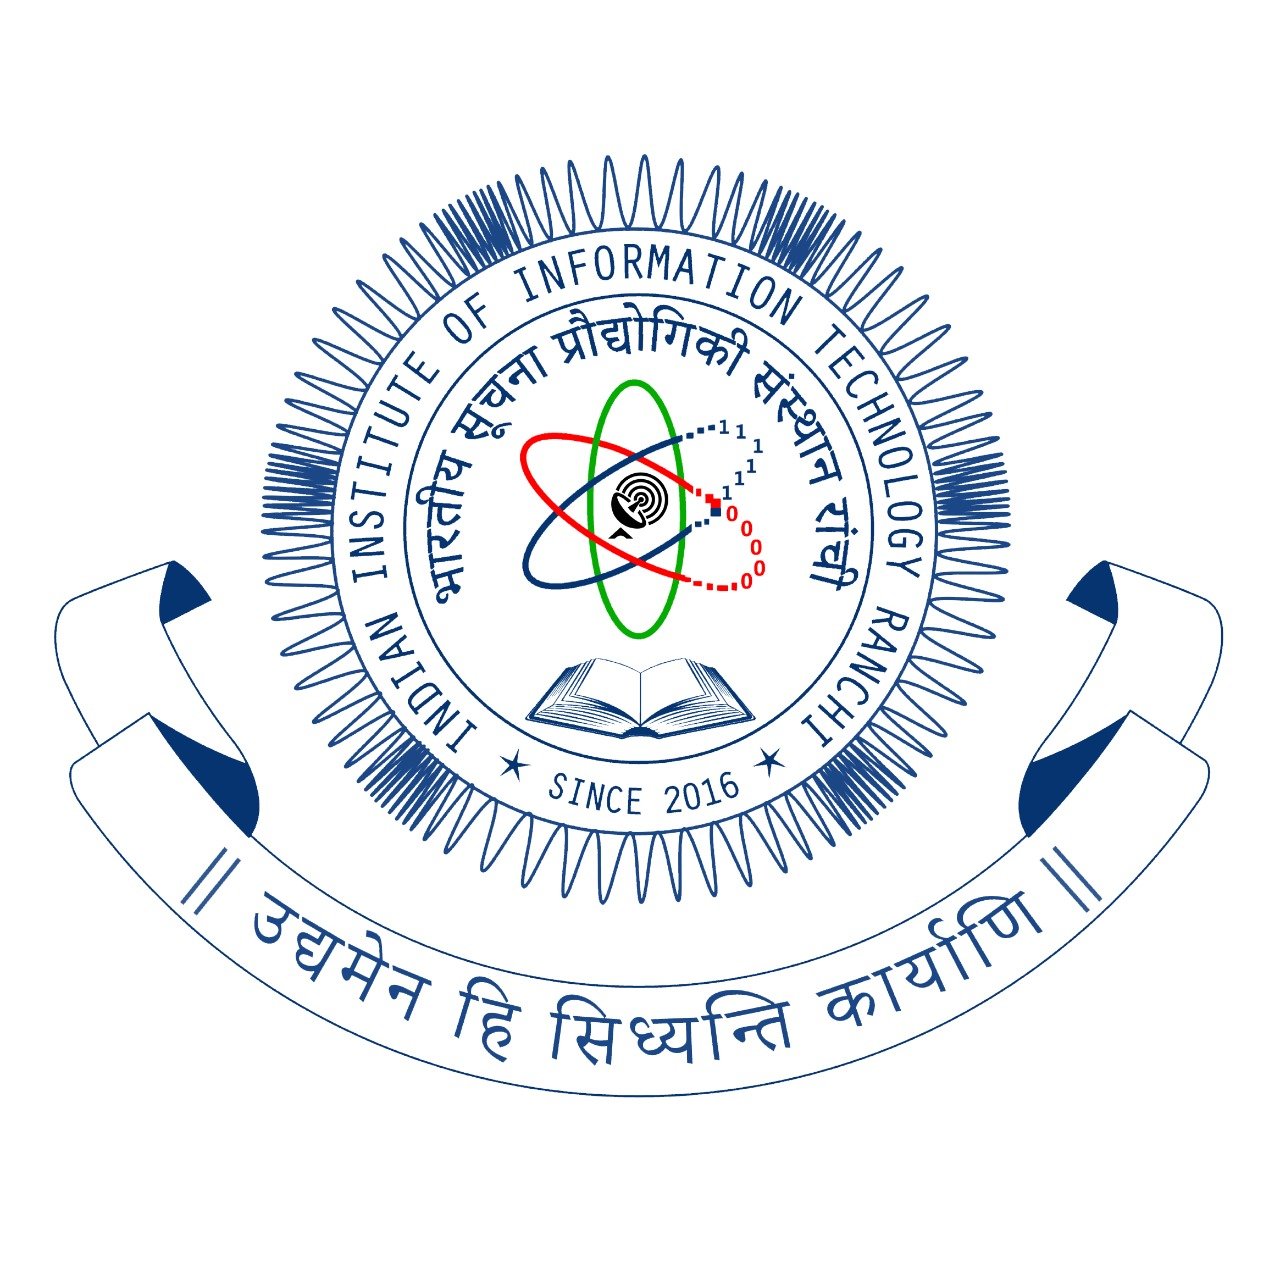 Indian Institute of Information Technology Ranchi is an Institution of National Importance under MHRD, Government of India.